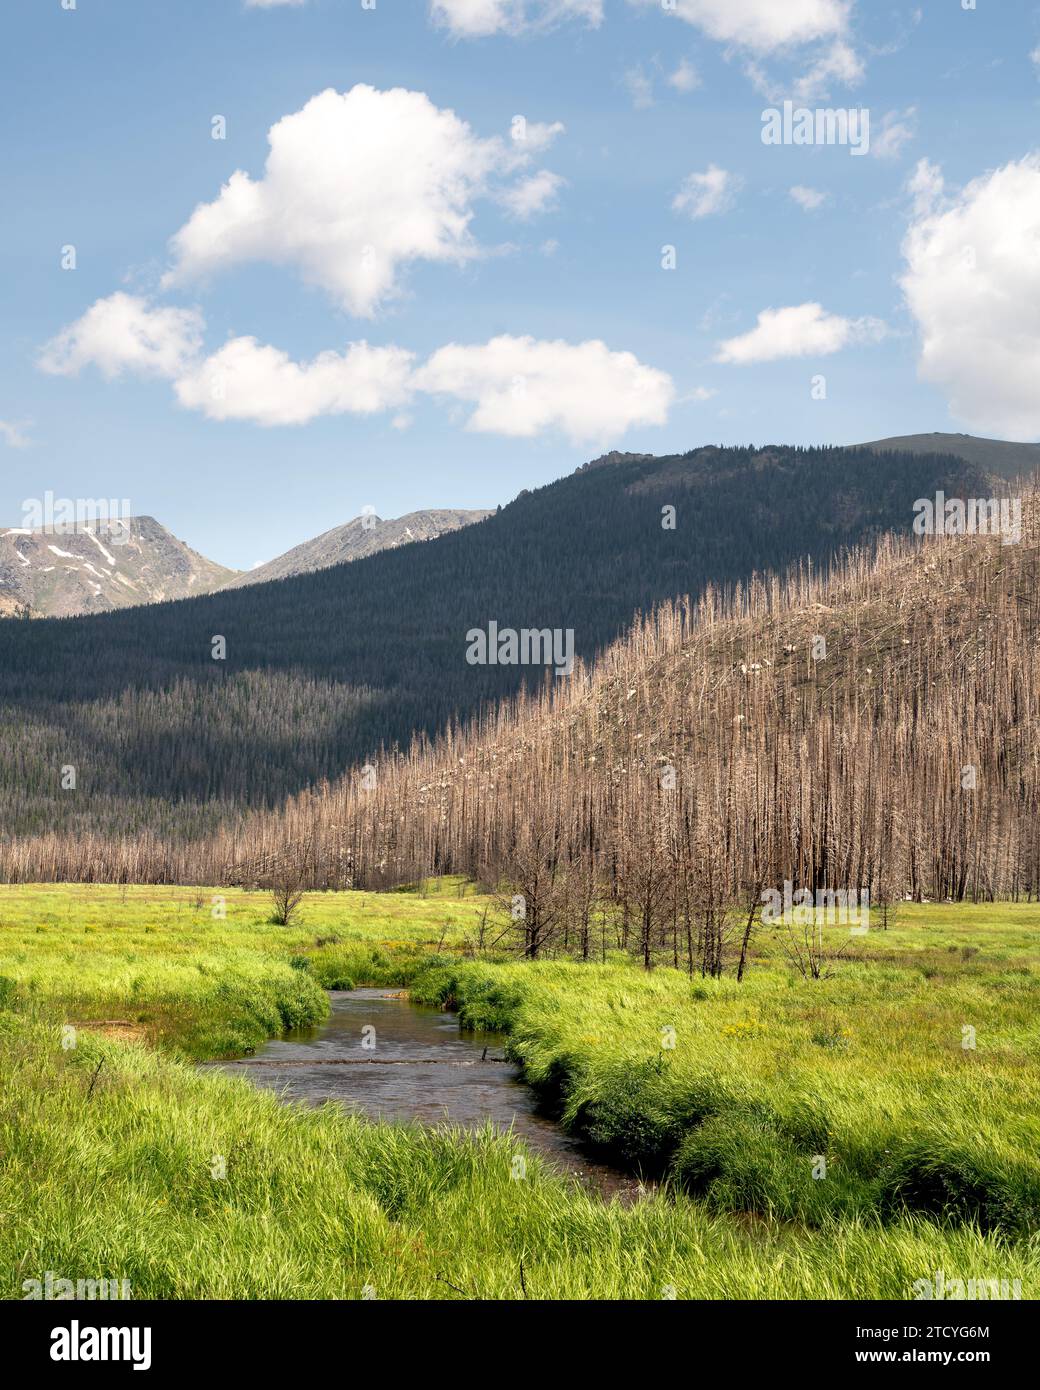 The tranquil waters of a meadow stream flow through a vibrant green valley against the backdrop of a recovering burnt forest in Rocky Mountain Nationa Stock Photo